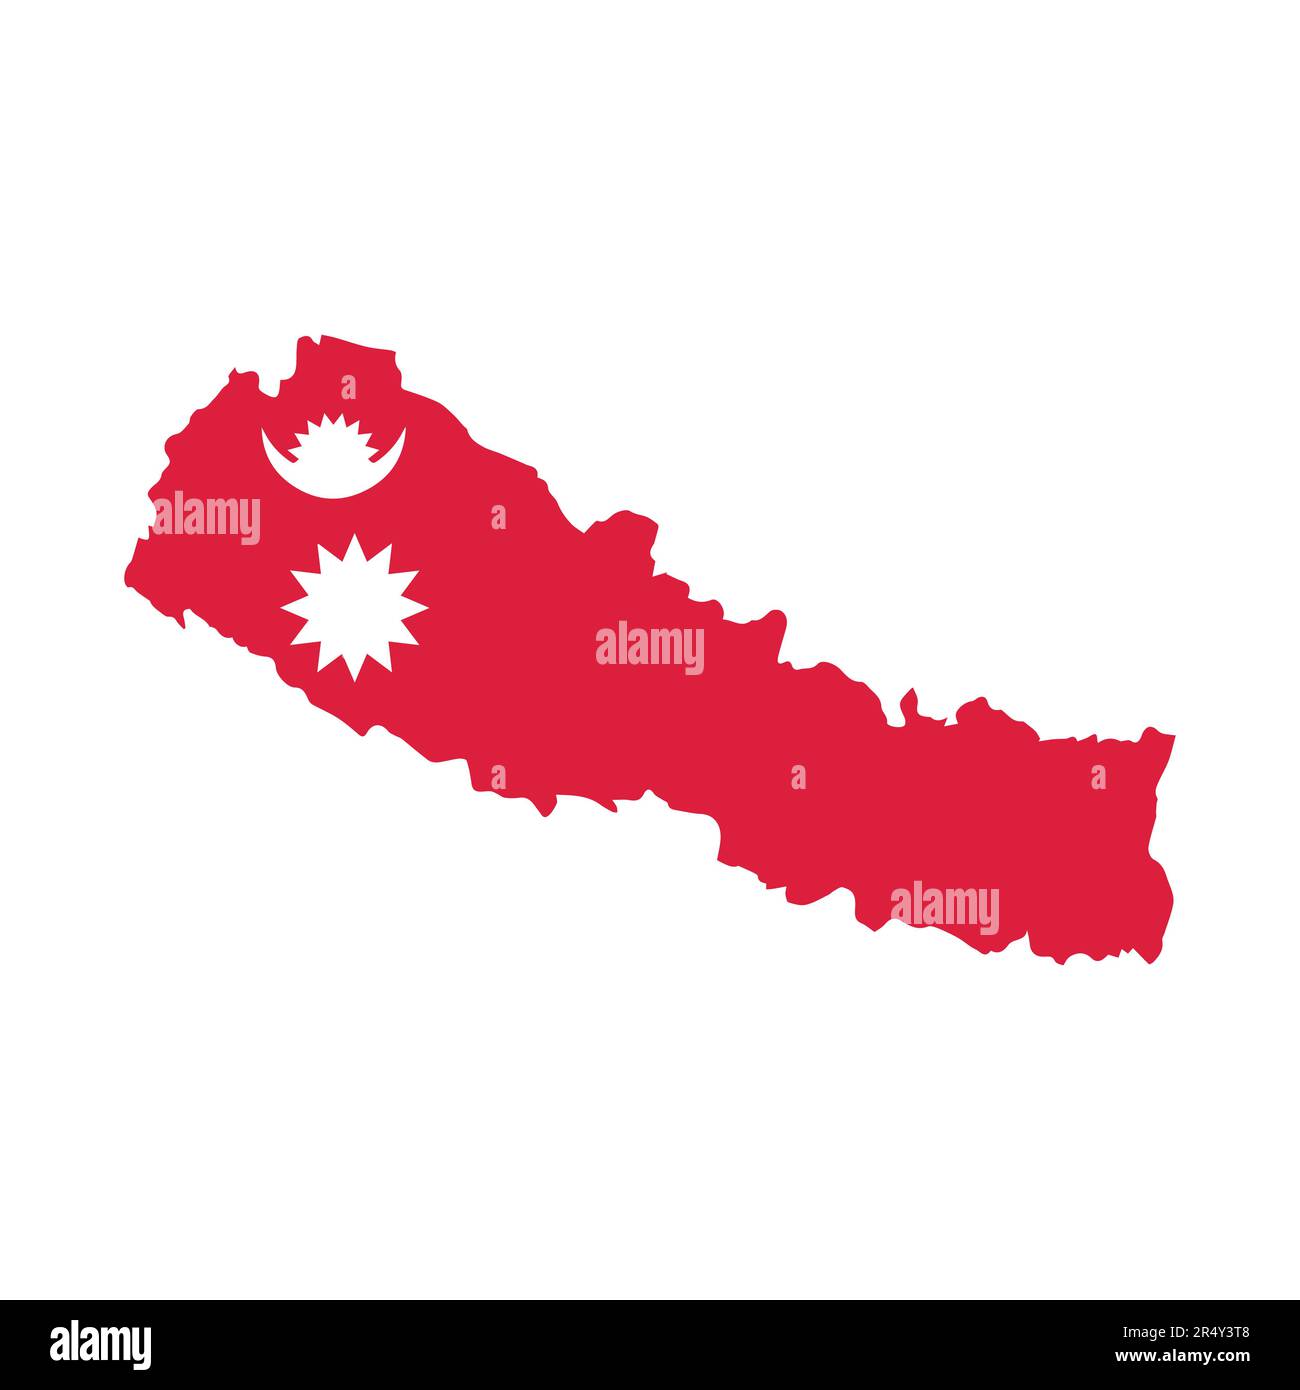 Nepal map and flag vector illustration Stock Vector